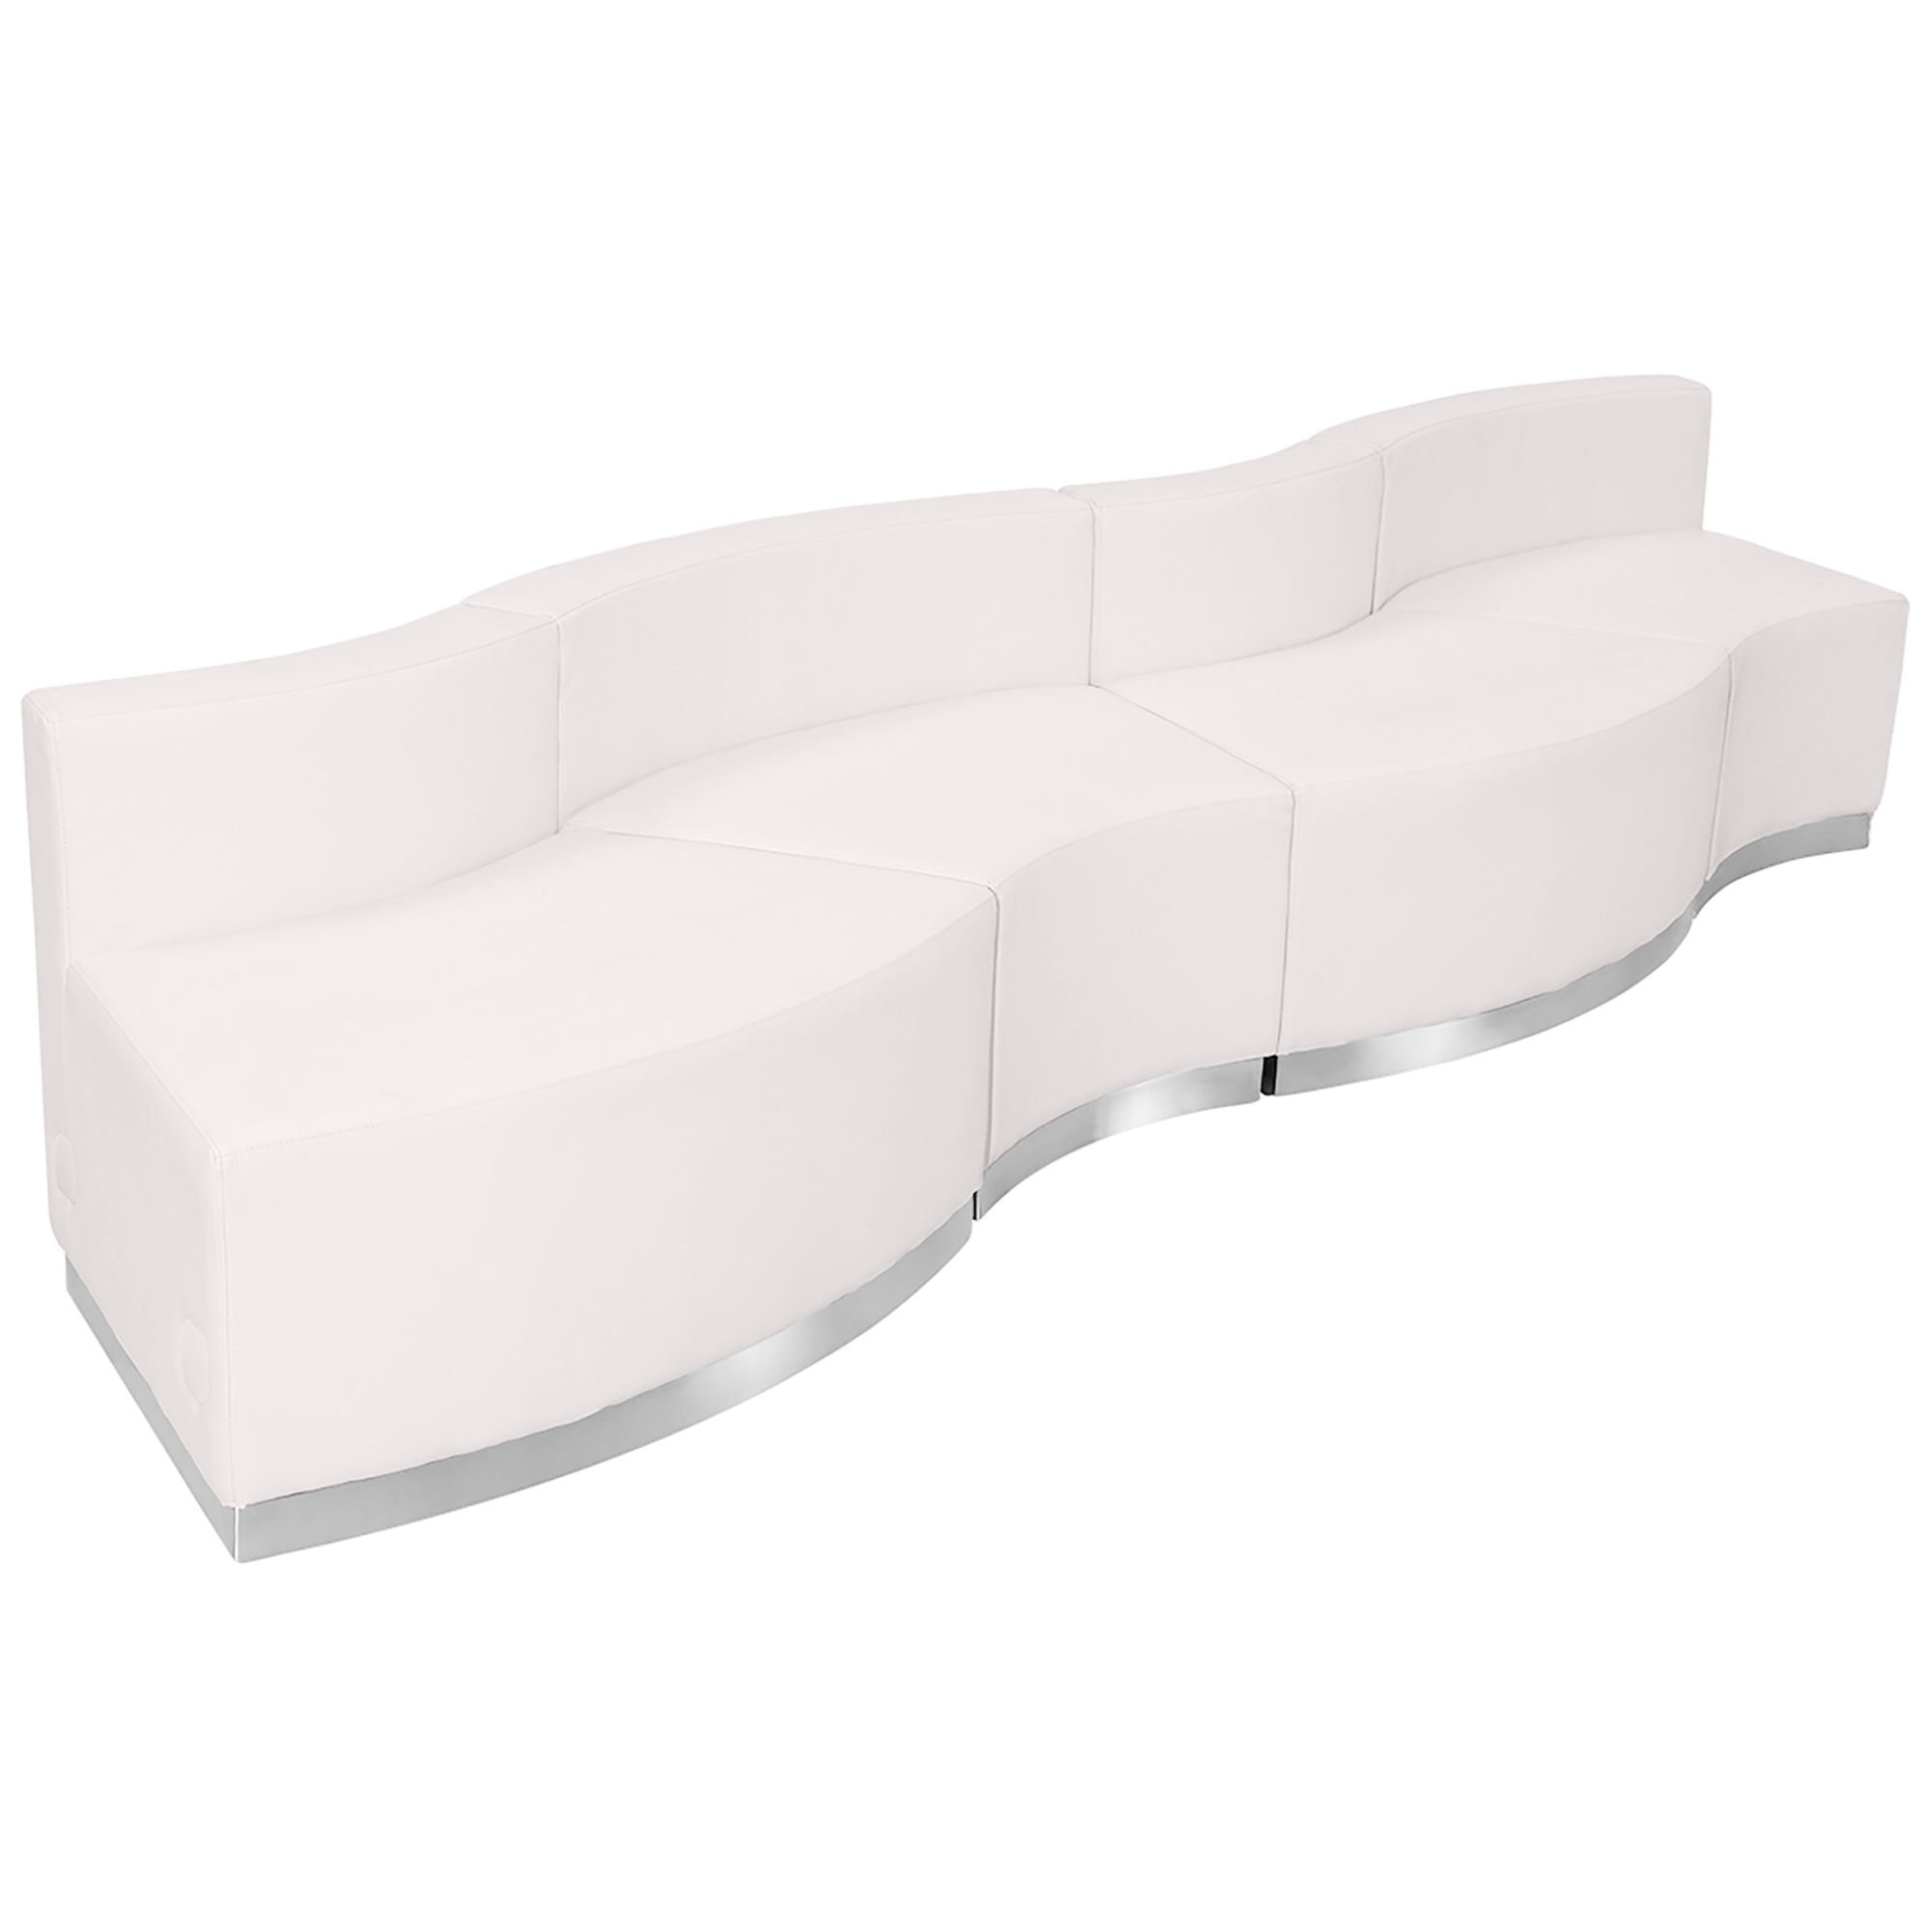 Flash Furniture, 4 PC White LeatherSoft Reception Configuration, Primary Color White, Included (qty.) 4, Model ZB803730SWH